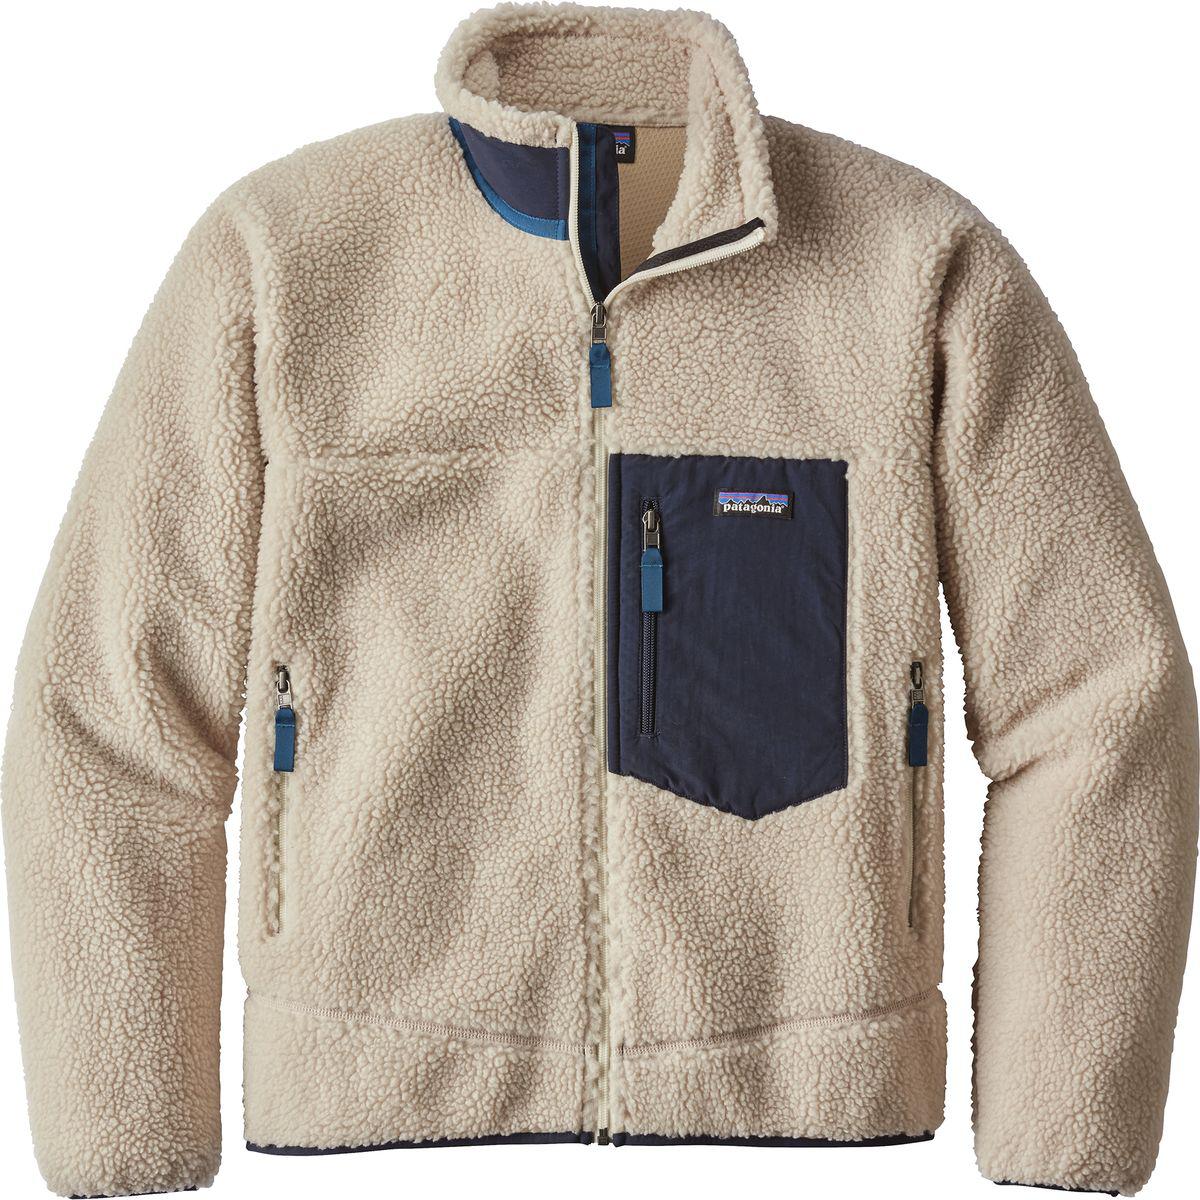 Patagonia Fleece Classic Retro-x Jacket in Natural for Men - Lyst